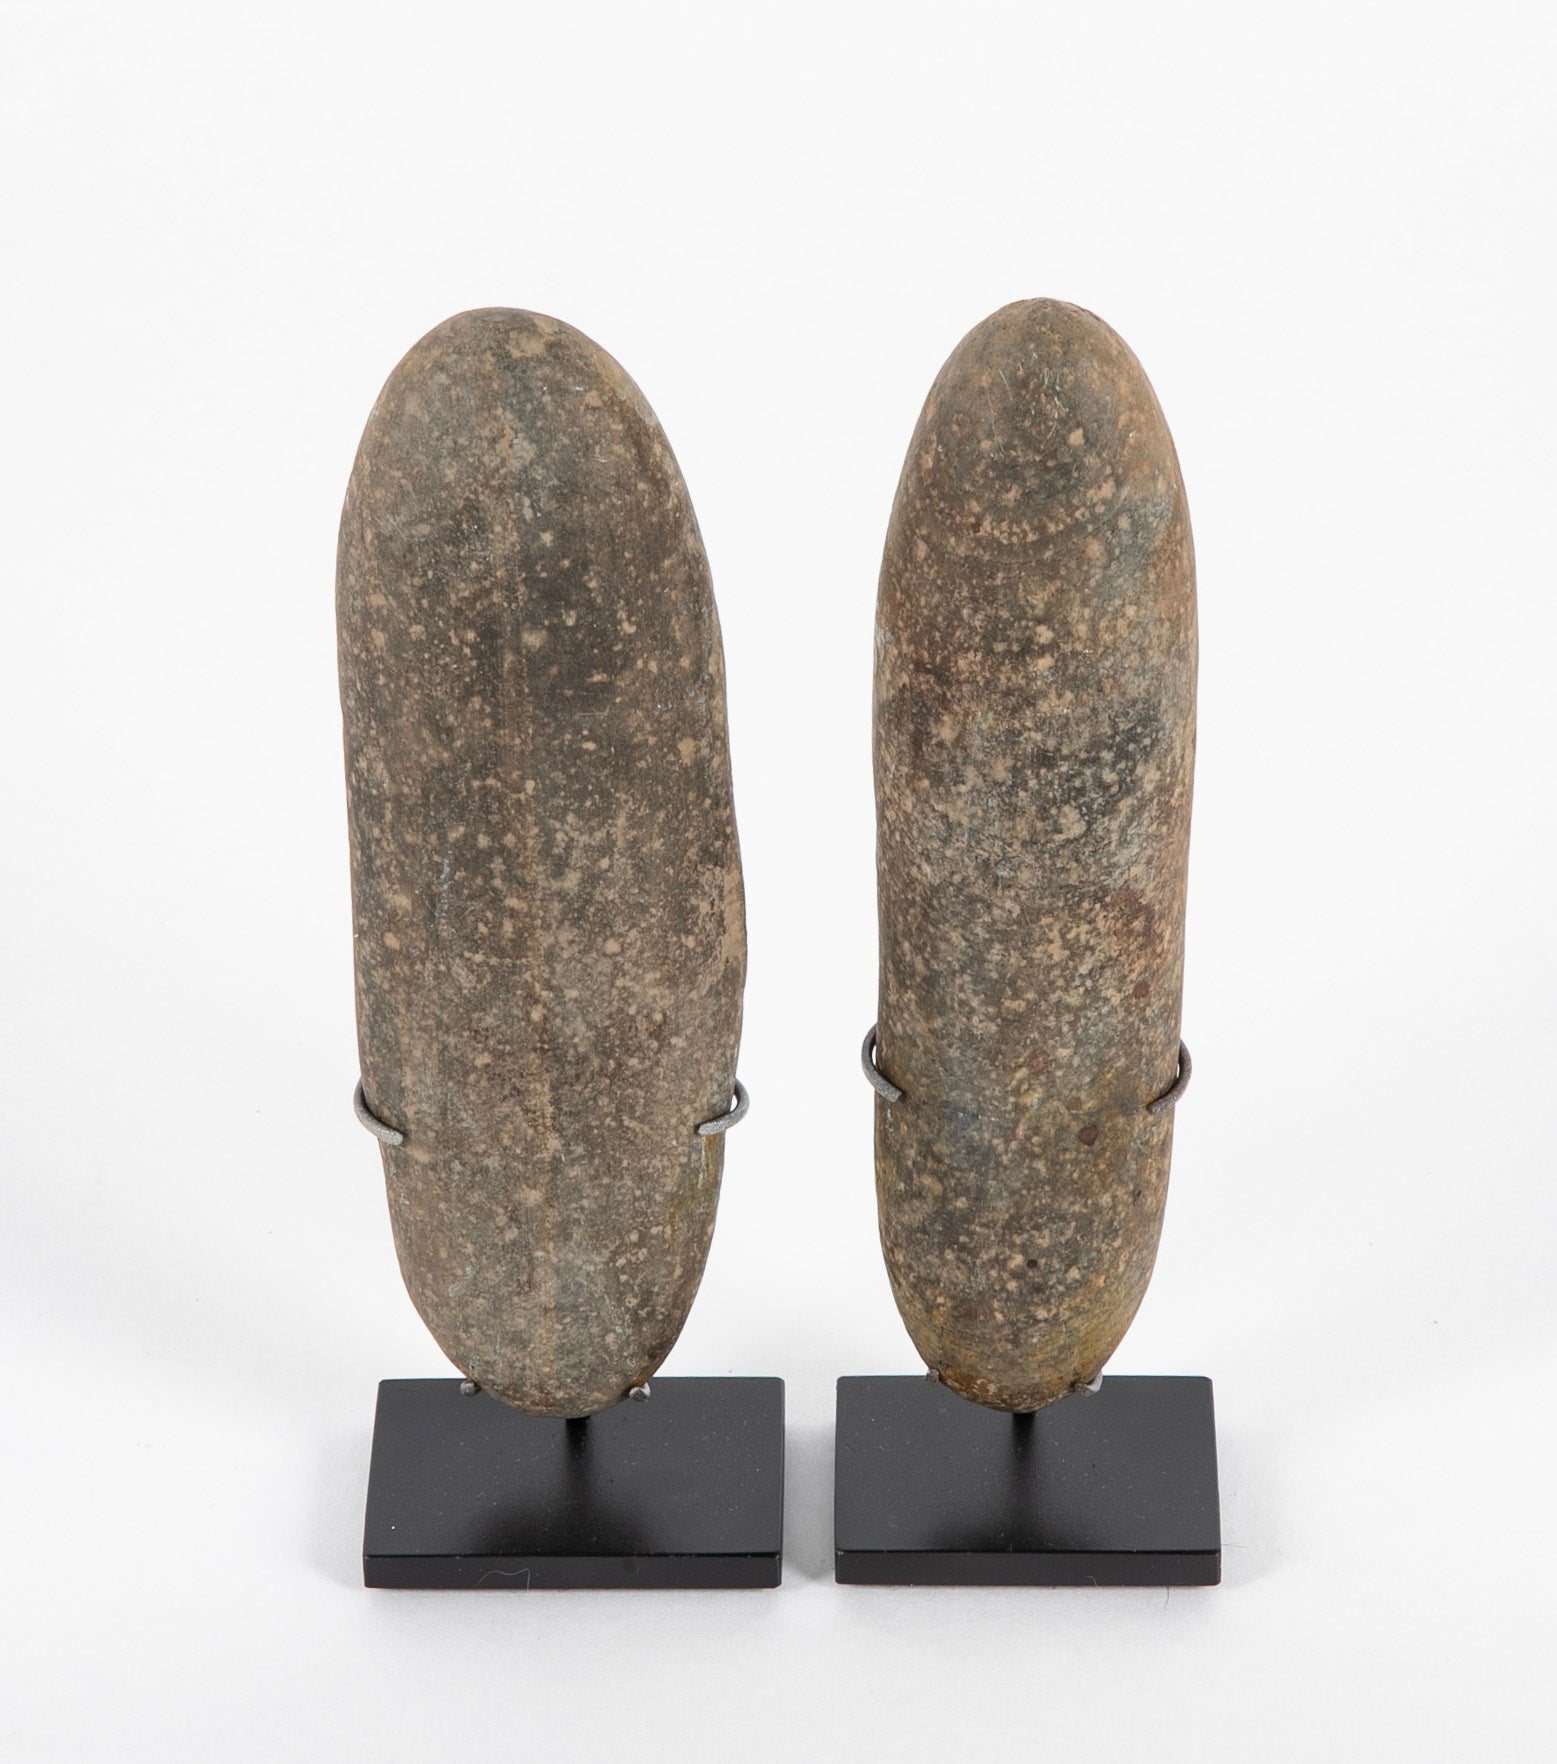 Pair of Neolithic Basalt Stone Celts, Great Britain